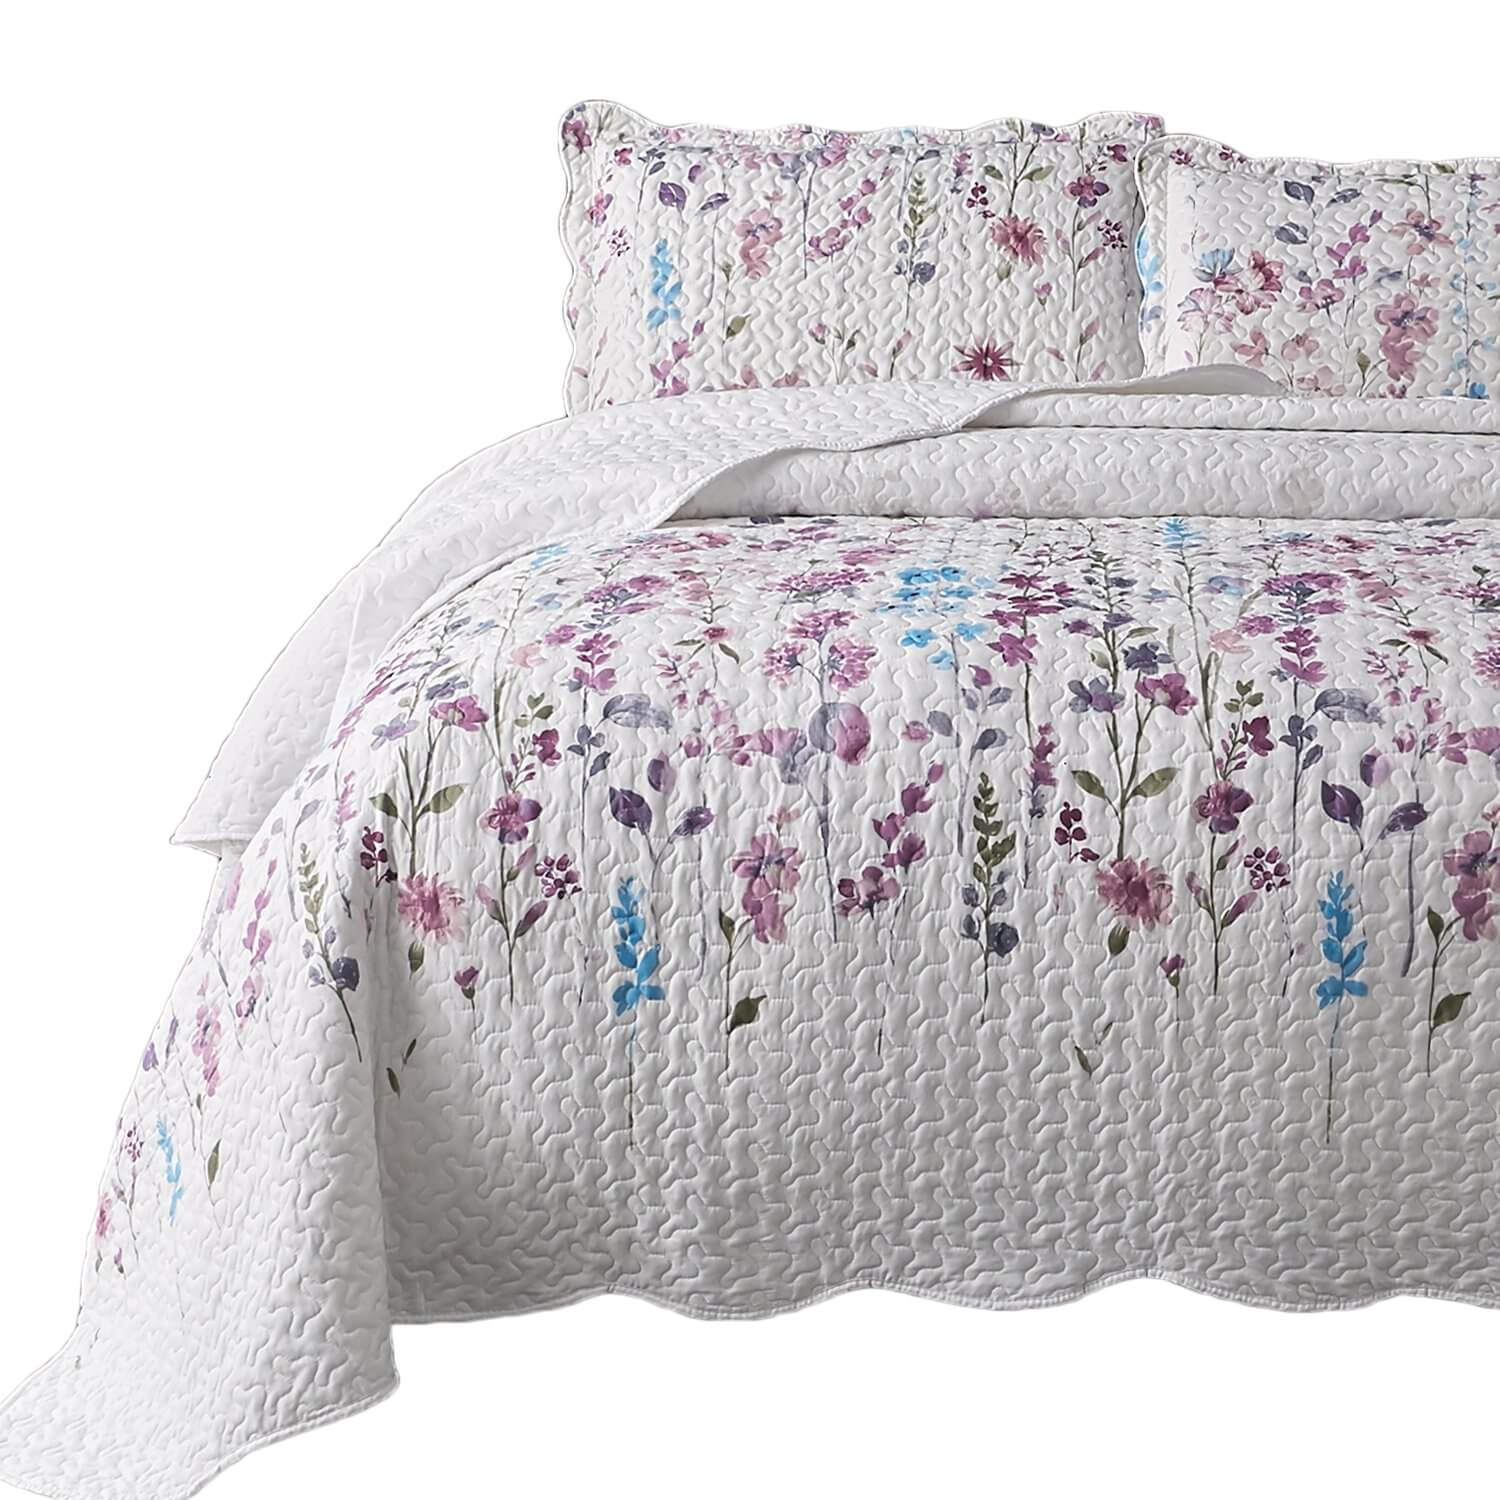 5. Bedsure Printed Quilt Coverlet Set Twin